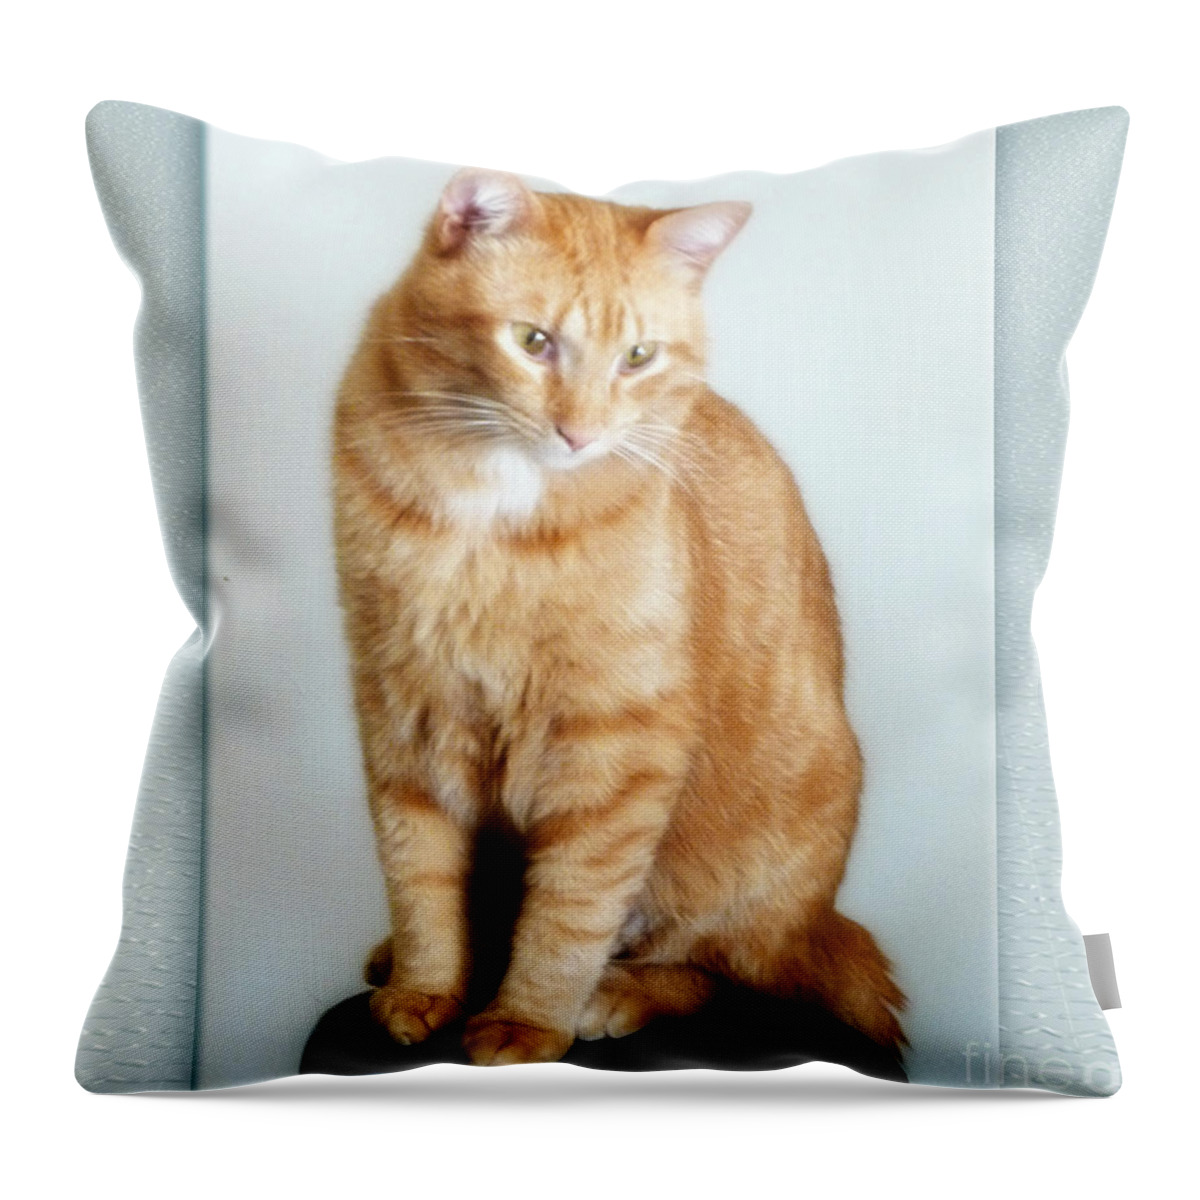 Kitten Throw Pillow featuring the digital art Quo the poser - photograph by RGiada by Giada Rossi